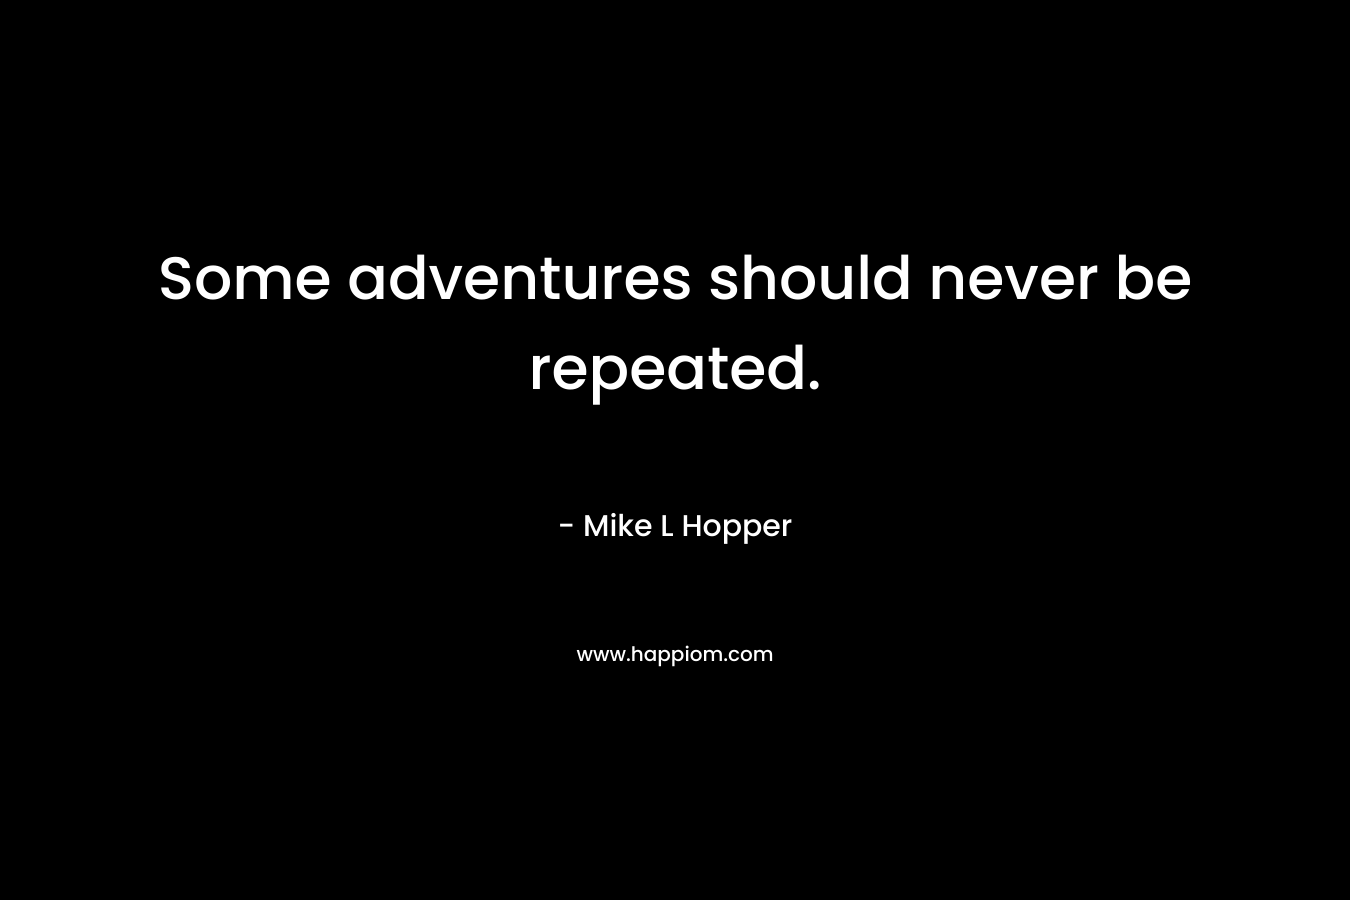 Some adventures should never be repeated. – Mike L Hopper